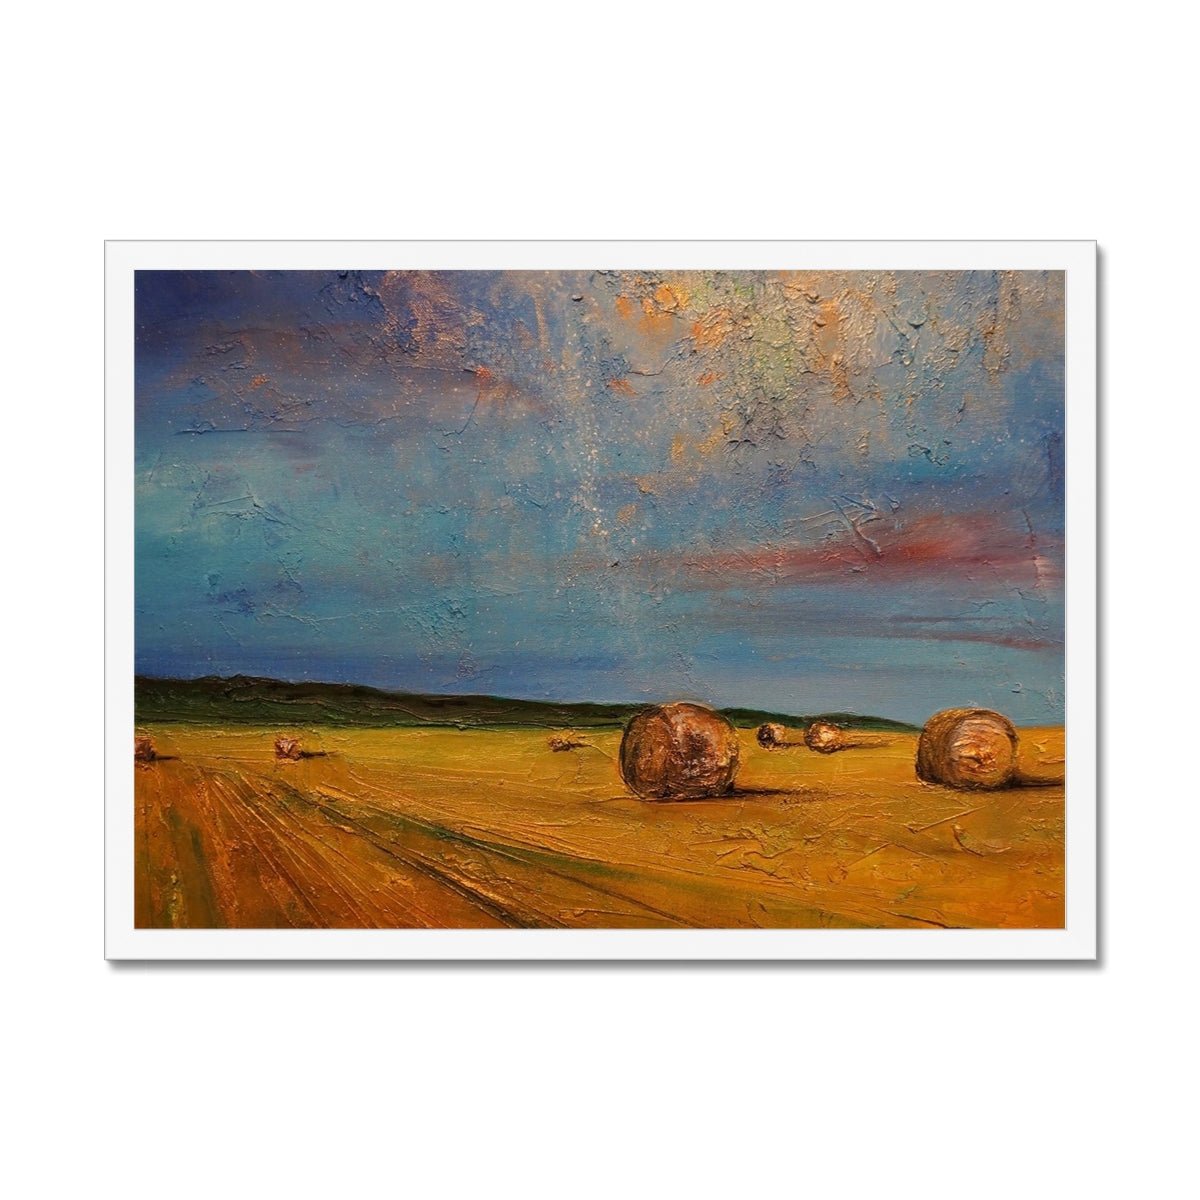 Hay Bales Painting | Framed Prints From Scotland-Framed Prints-Scottish Highlands & Lowlands Art Gallery-A2 Landscape-White Frame-Paintings, Prints, Homeware, Art Gifts From Scotland By Scottish Artist Kevin Hunter